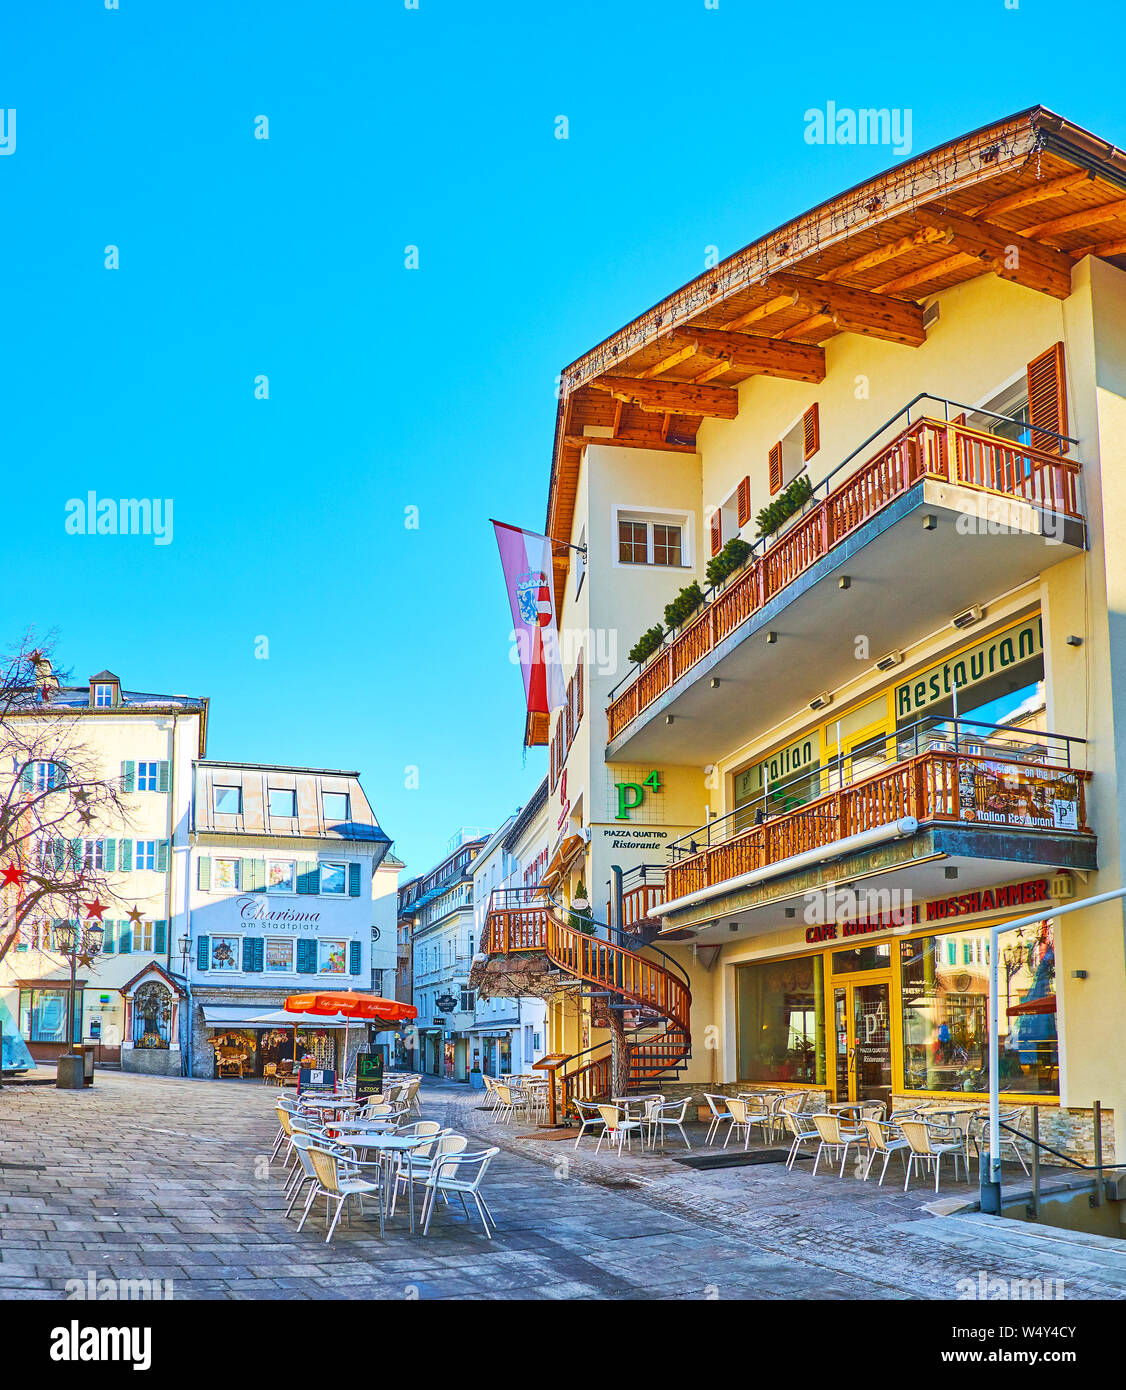 The old edifices, tourist stores and restaurants in Stadtplatz square, Zell am See, Austria Stock Photo